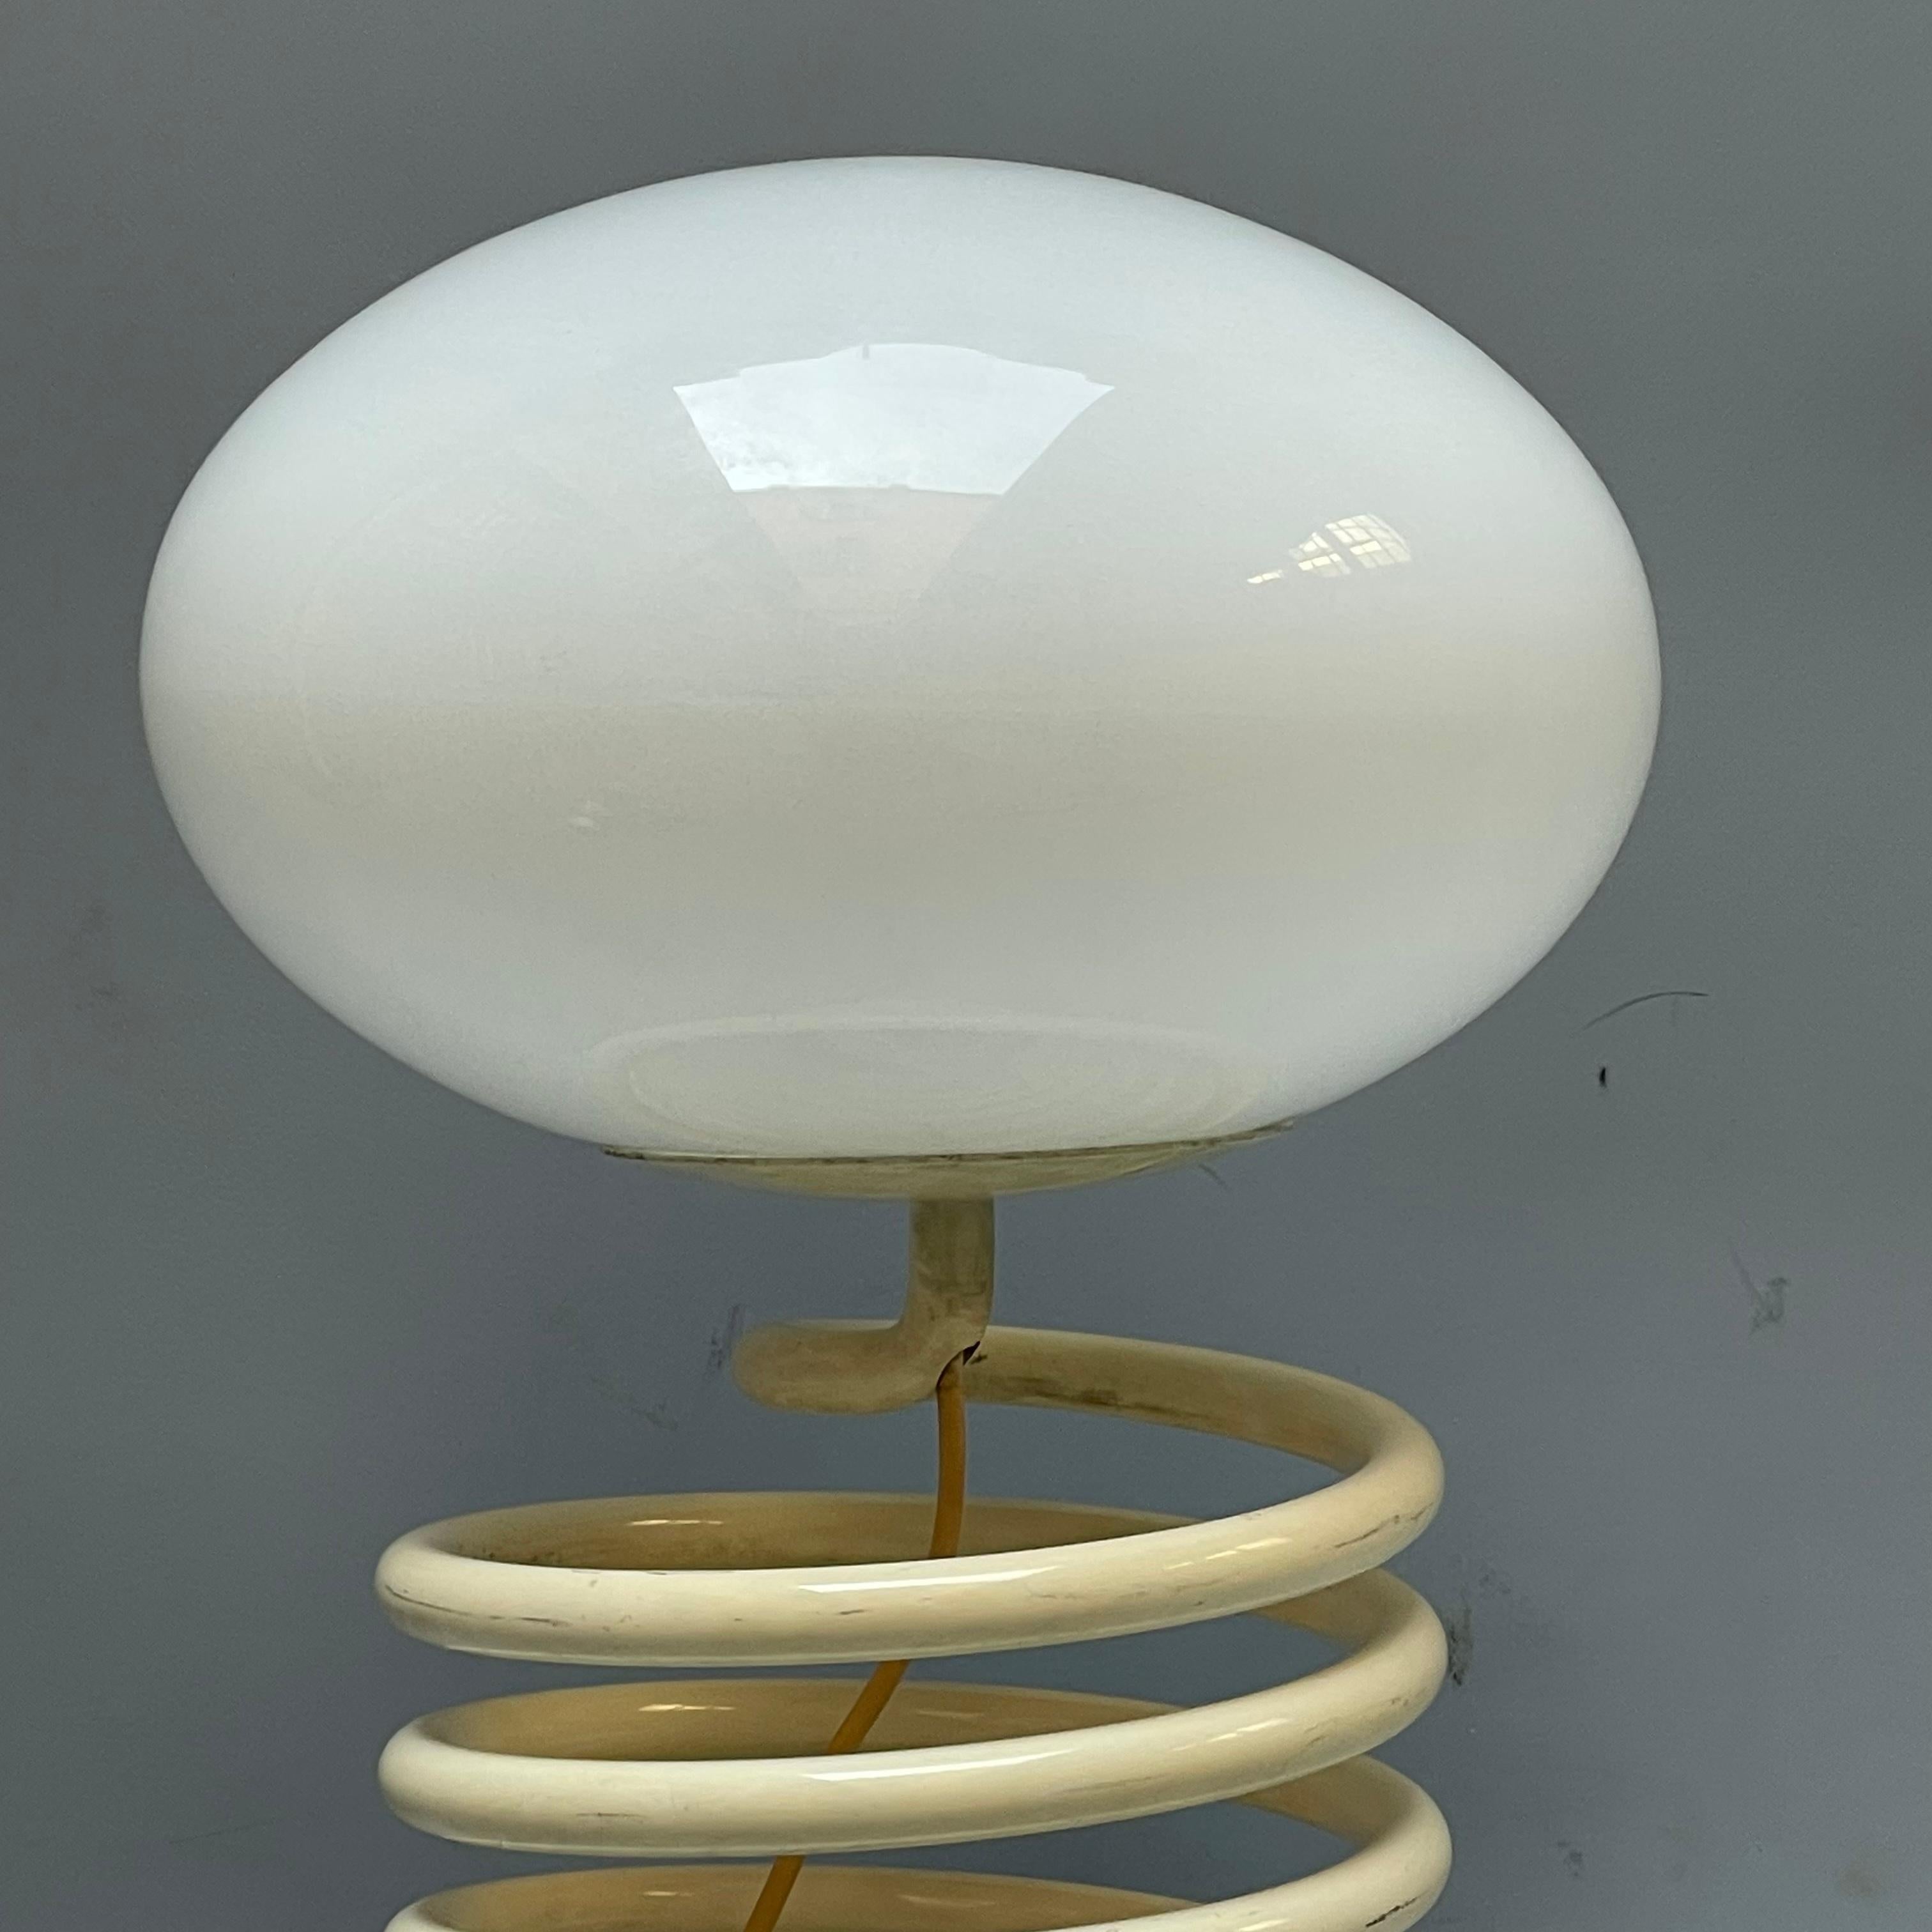 Spiral lamp designed by Ingo Maurer in the 1970s.  A collectible for anyone who is passionate about design, suitable to give a touch of originality to your home. The item is in good condition but has some minor signs of wear and tear due to time and